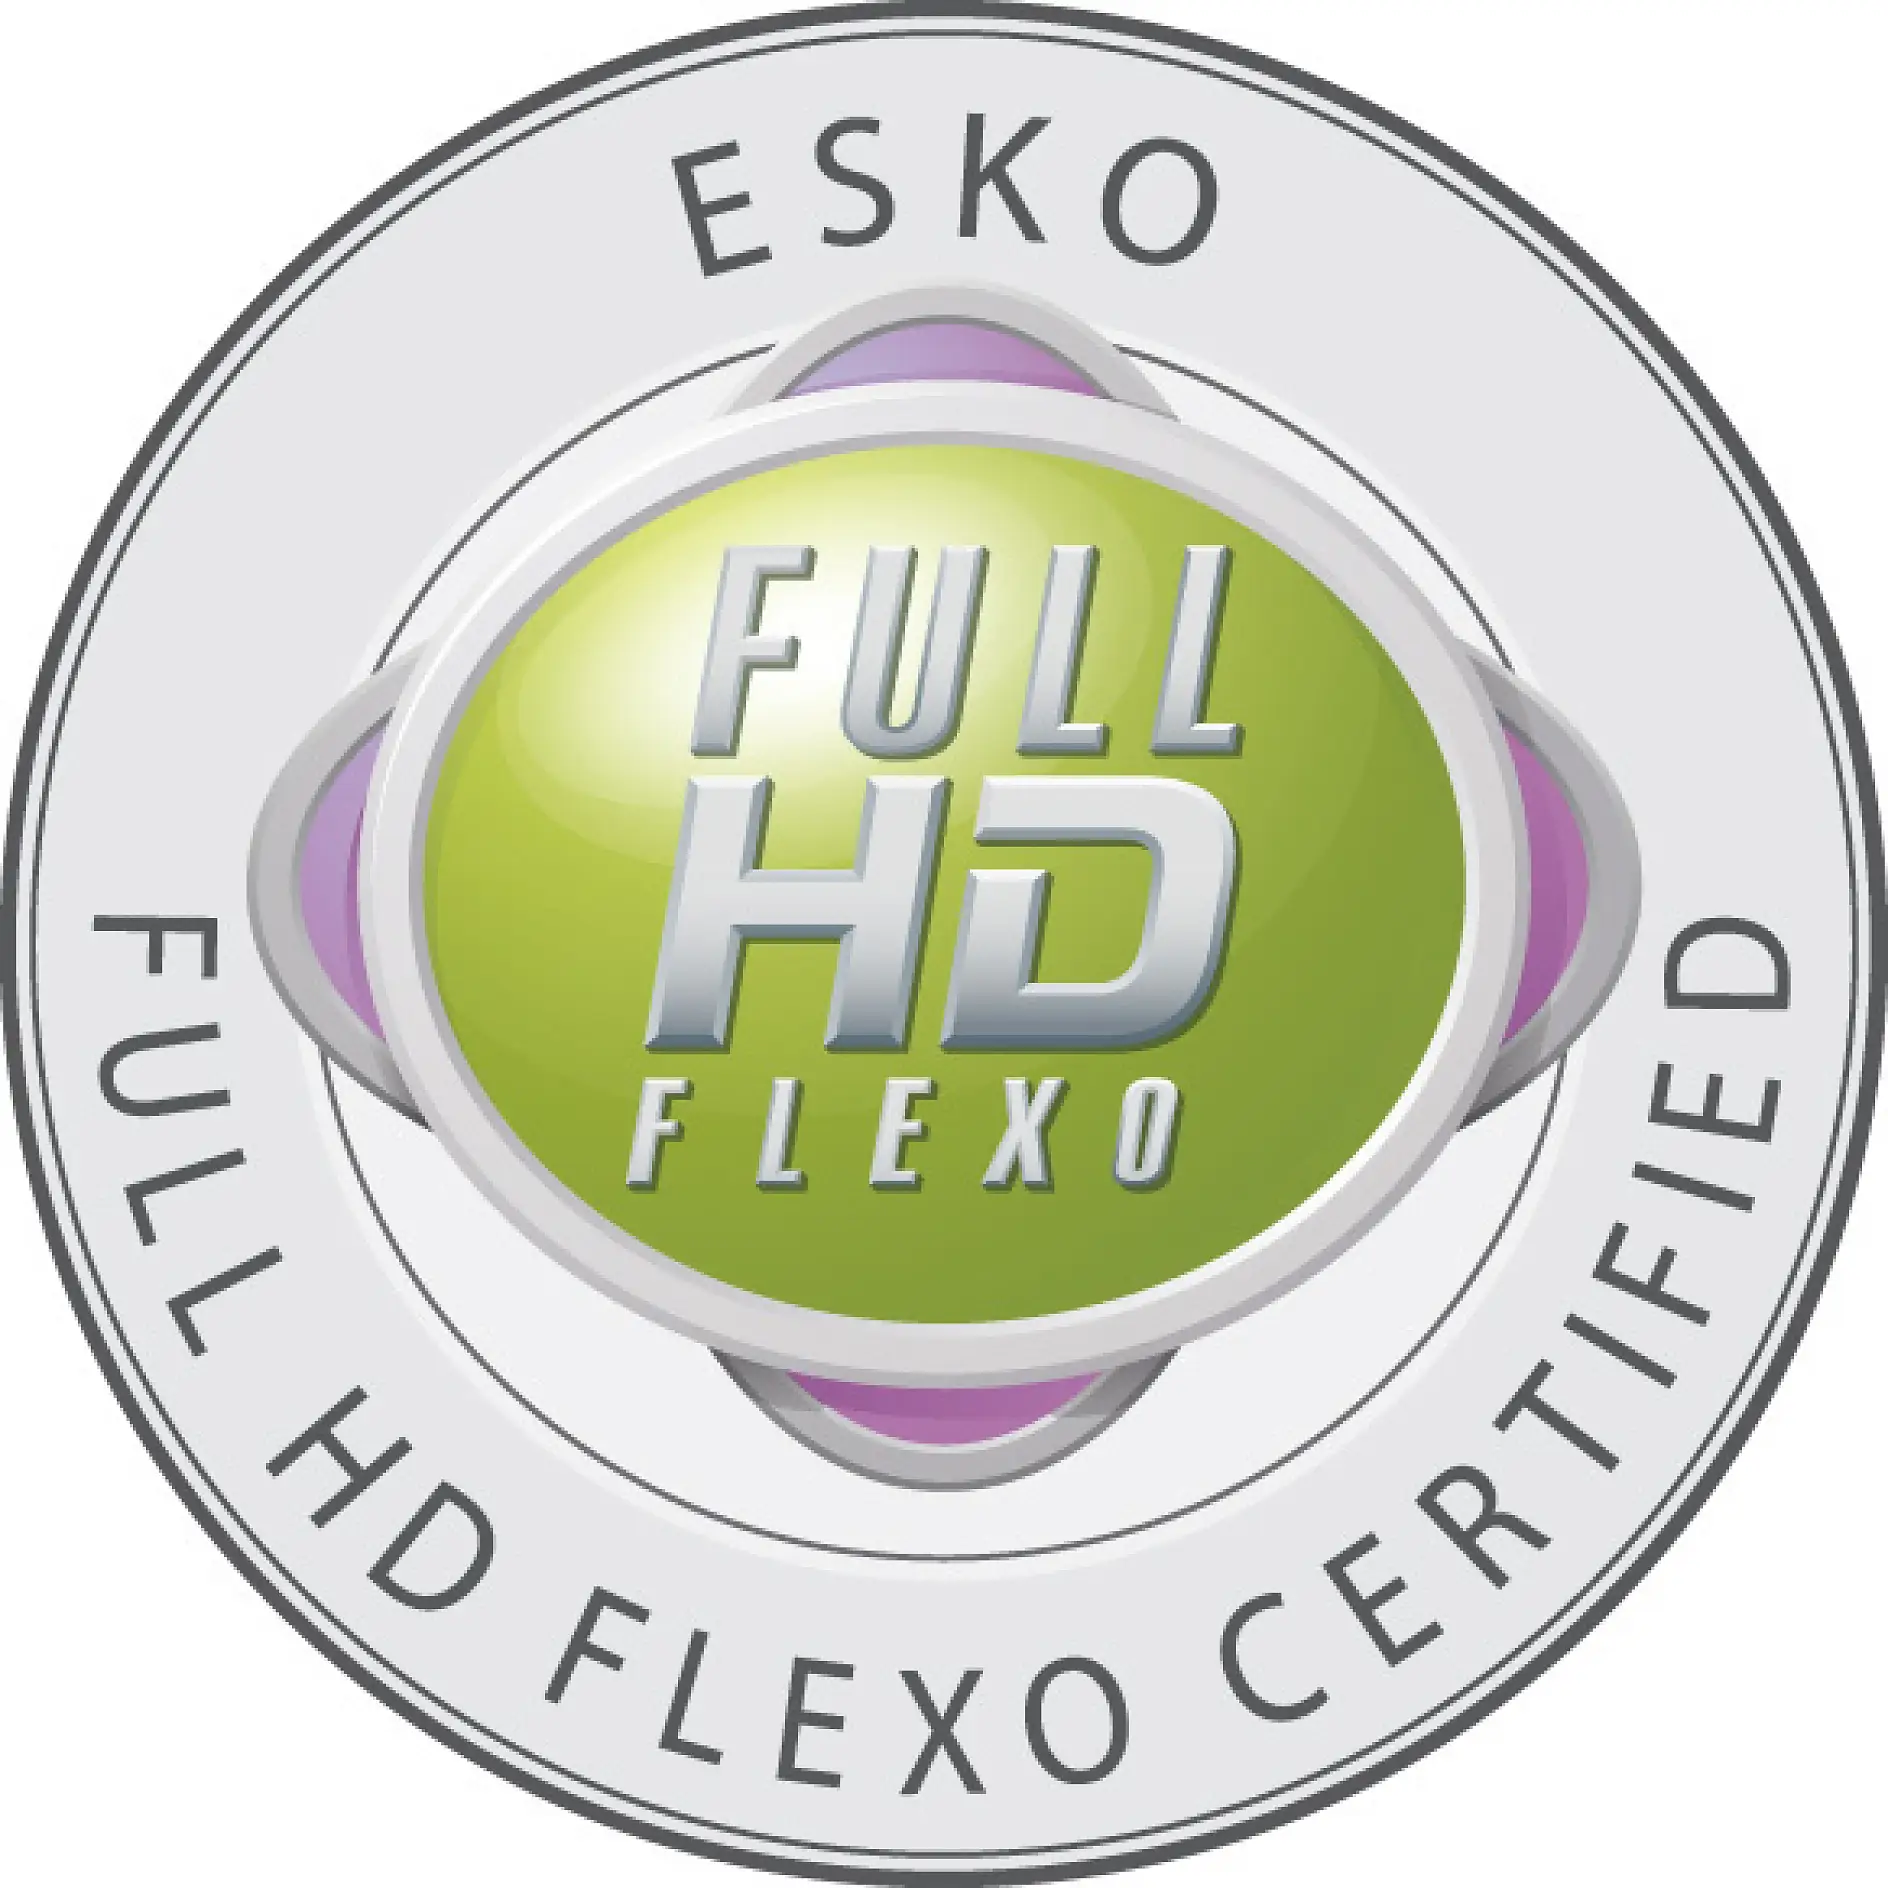 Only certified companies are allowed to carry the Full HD Flexo badge